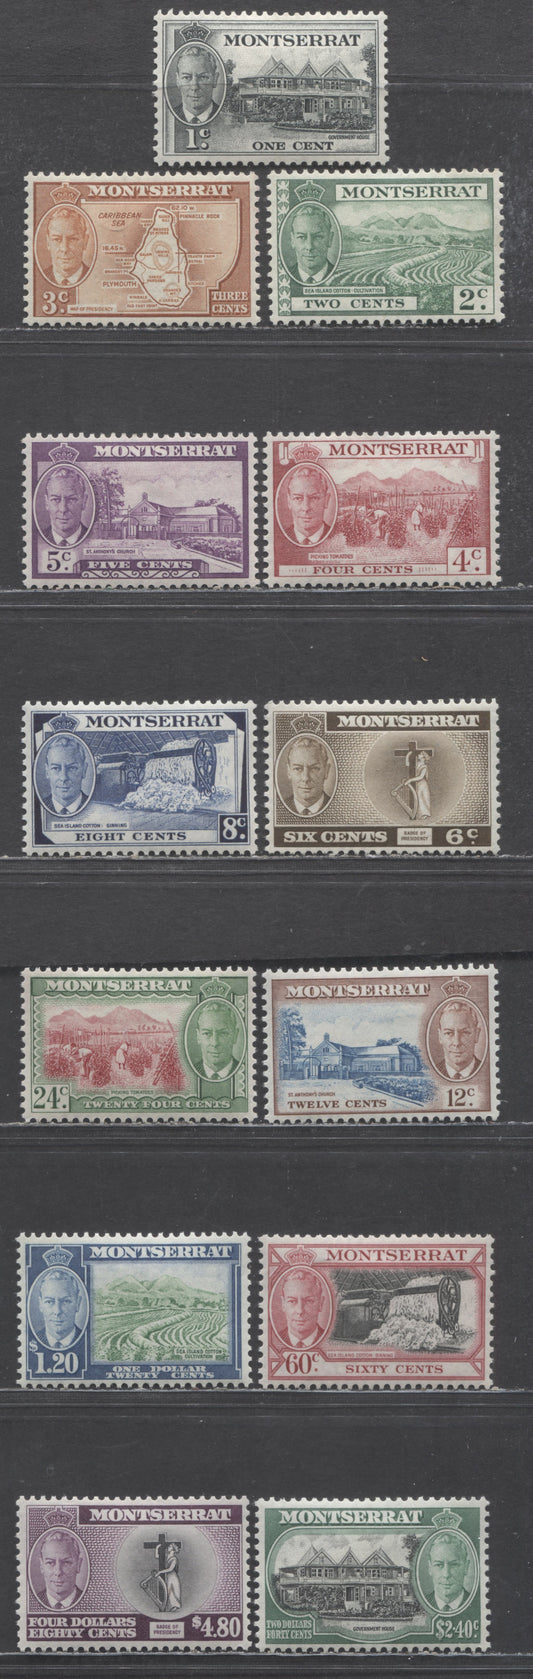 Lot 97 Montserrat SC#114-126 1951 Pictorial Definitives, 13 VFOG Singles, Click on Listing to See ALL Pictures, Estimated Value $35